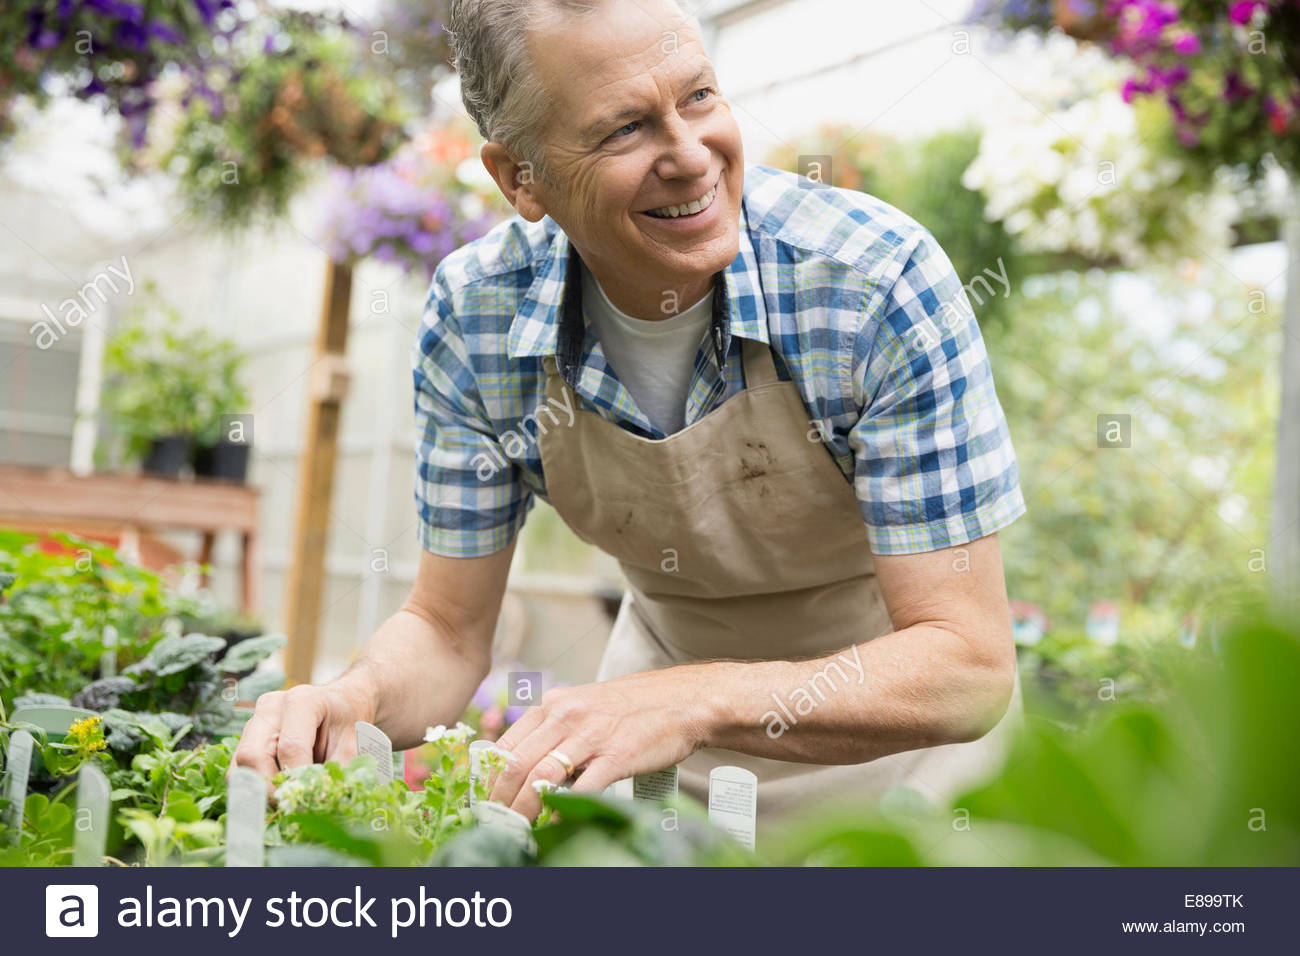 Smiling worker examining plant in plant nursery greenhouse Stock Photo